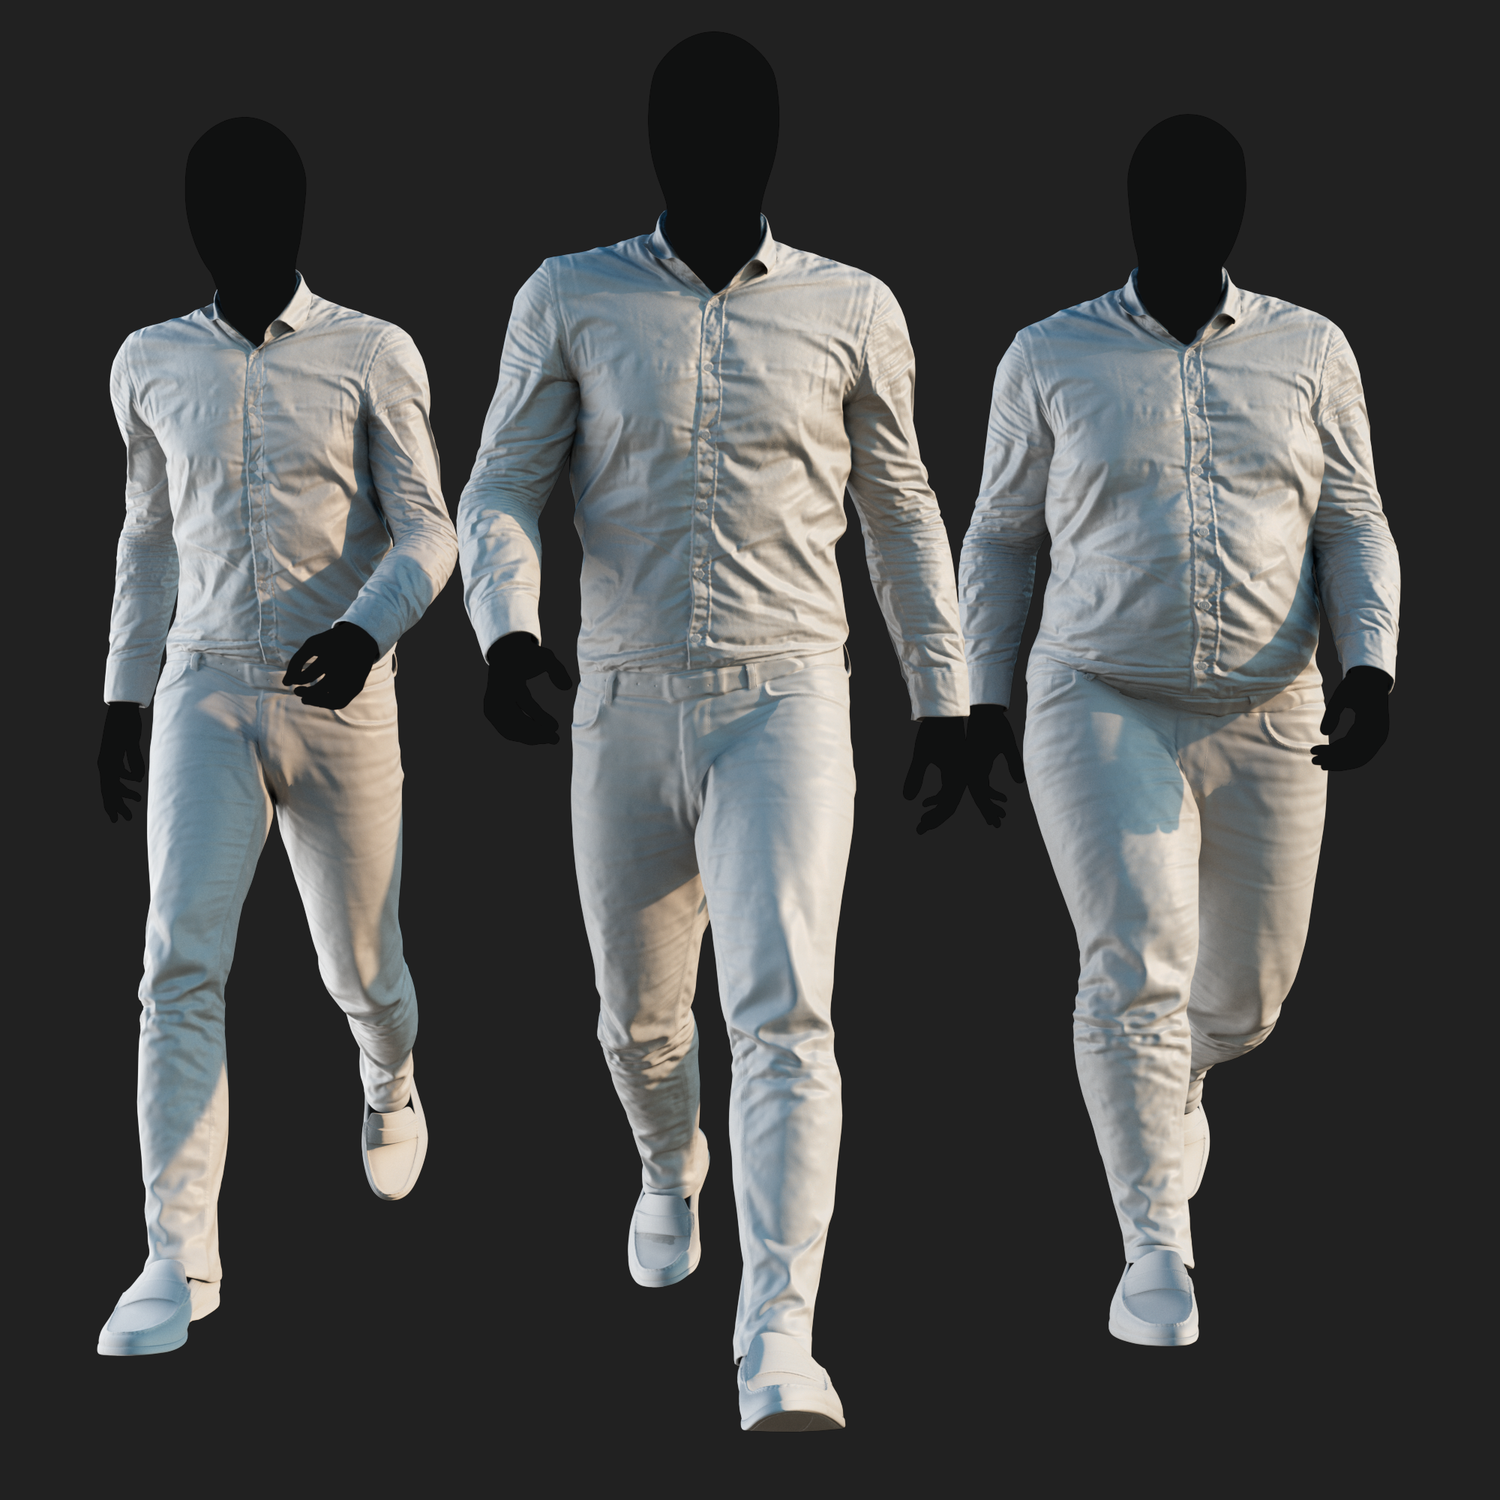 Ambient Occlusion map rendering of a 3D model of an animated walking male character dressed in a Camouflage Jacket and Jeans - front view